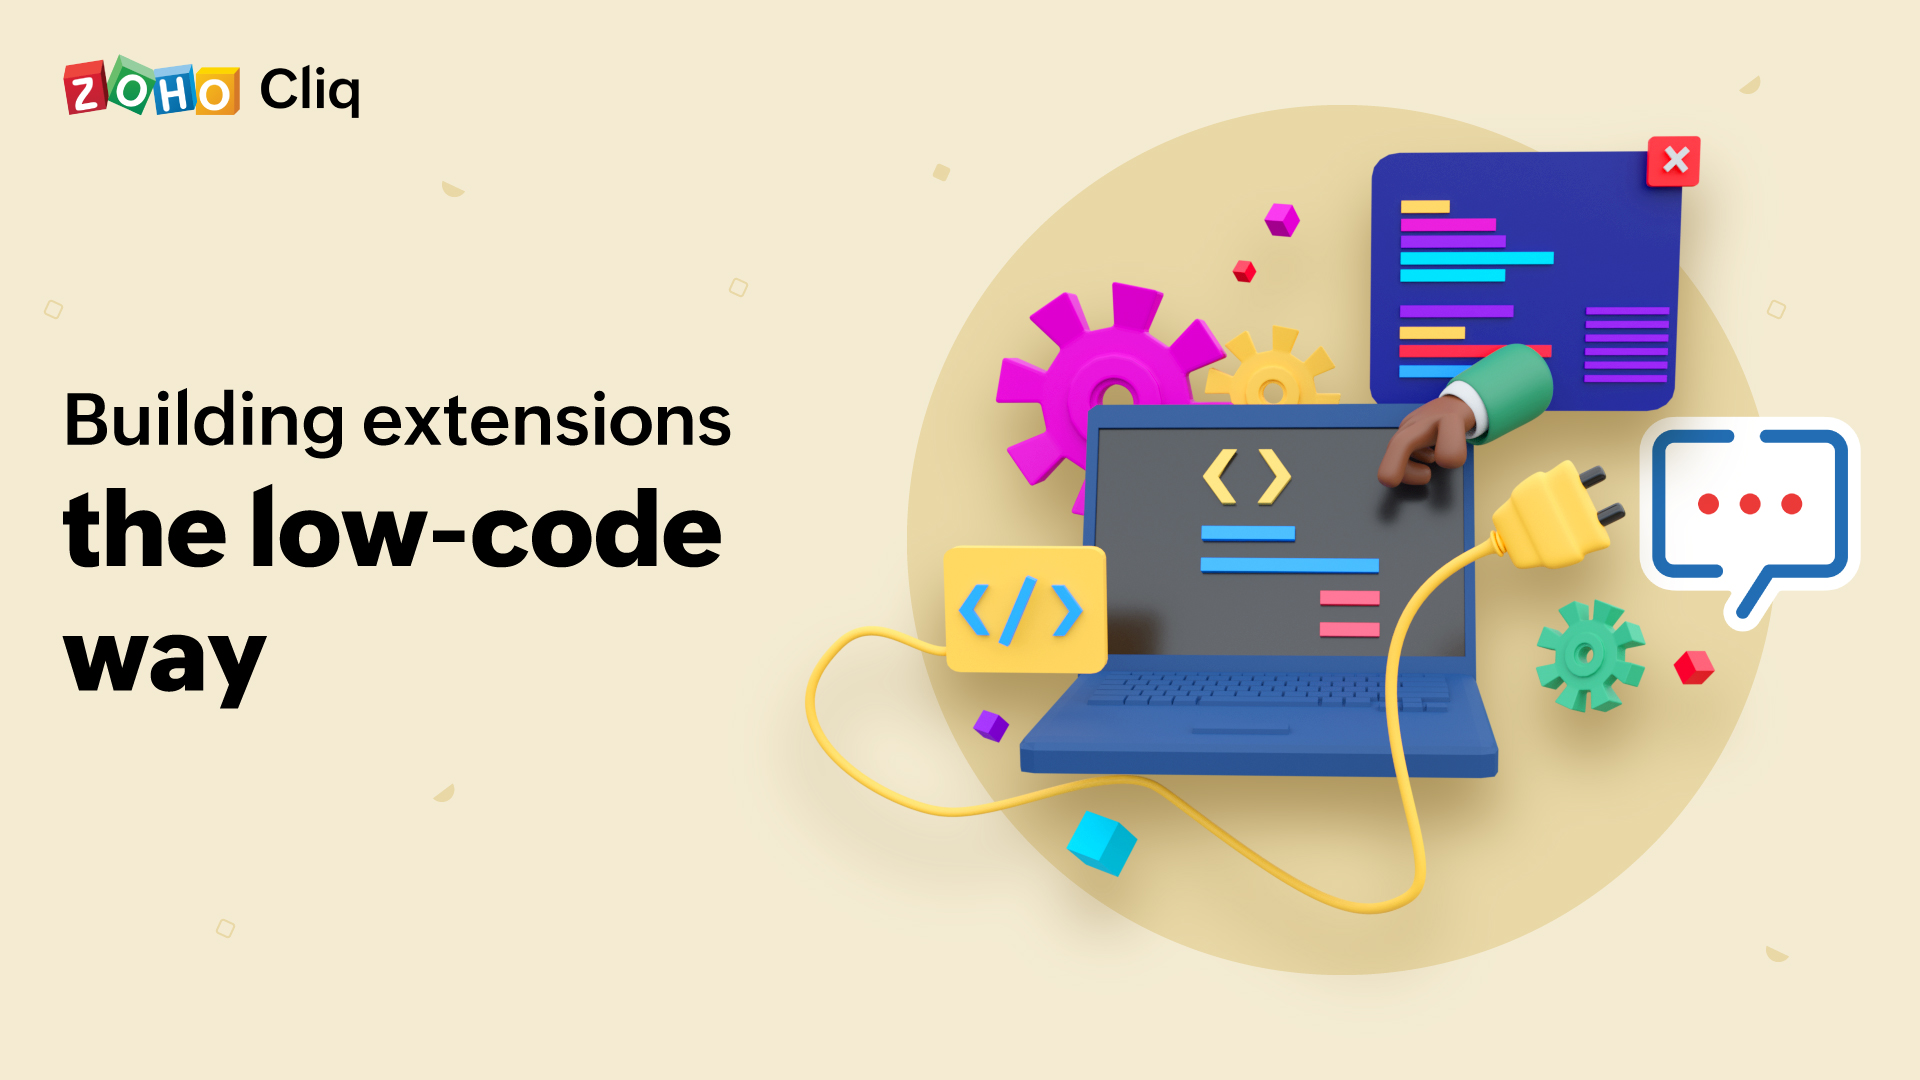 Building extensions the low-code way